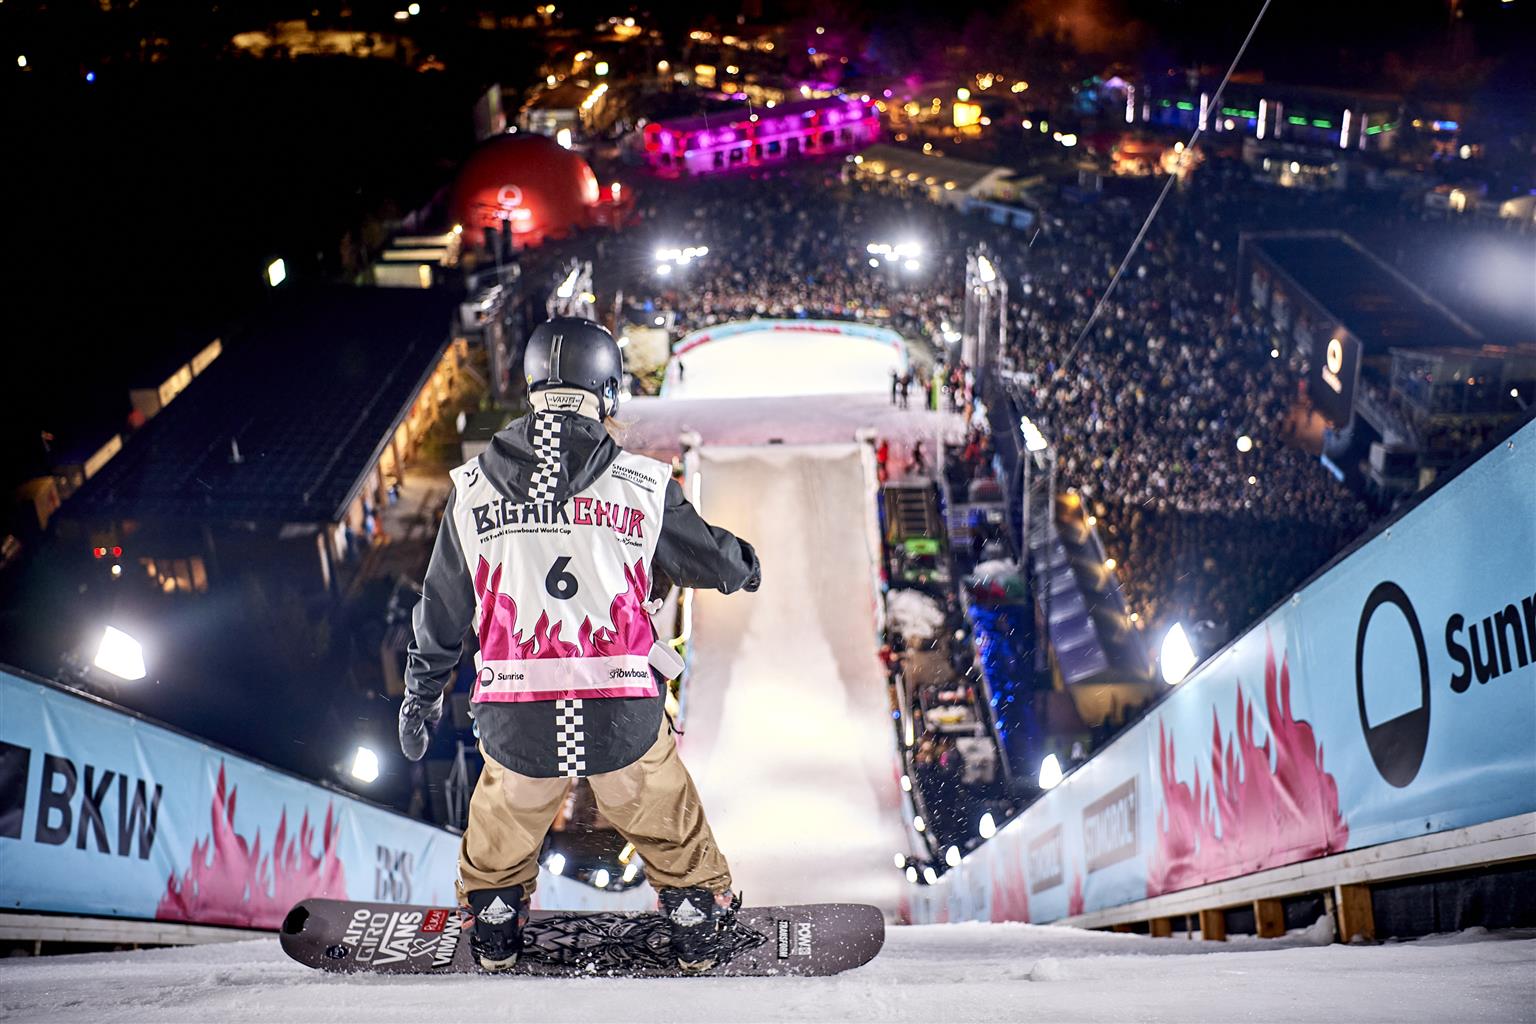 Boardriding Events FIS World Cup